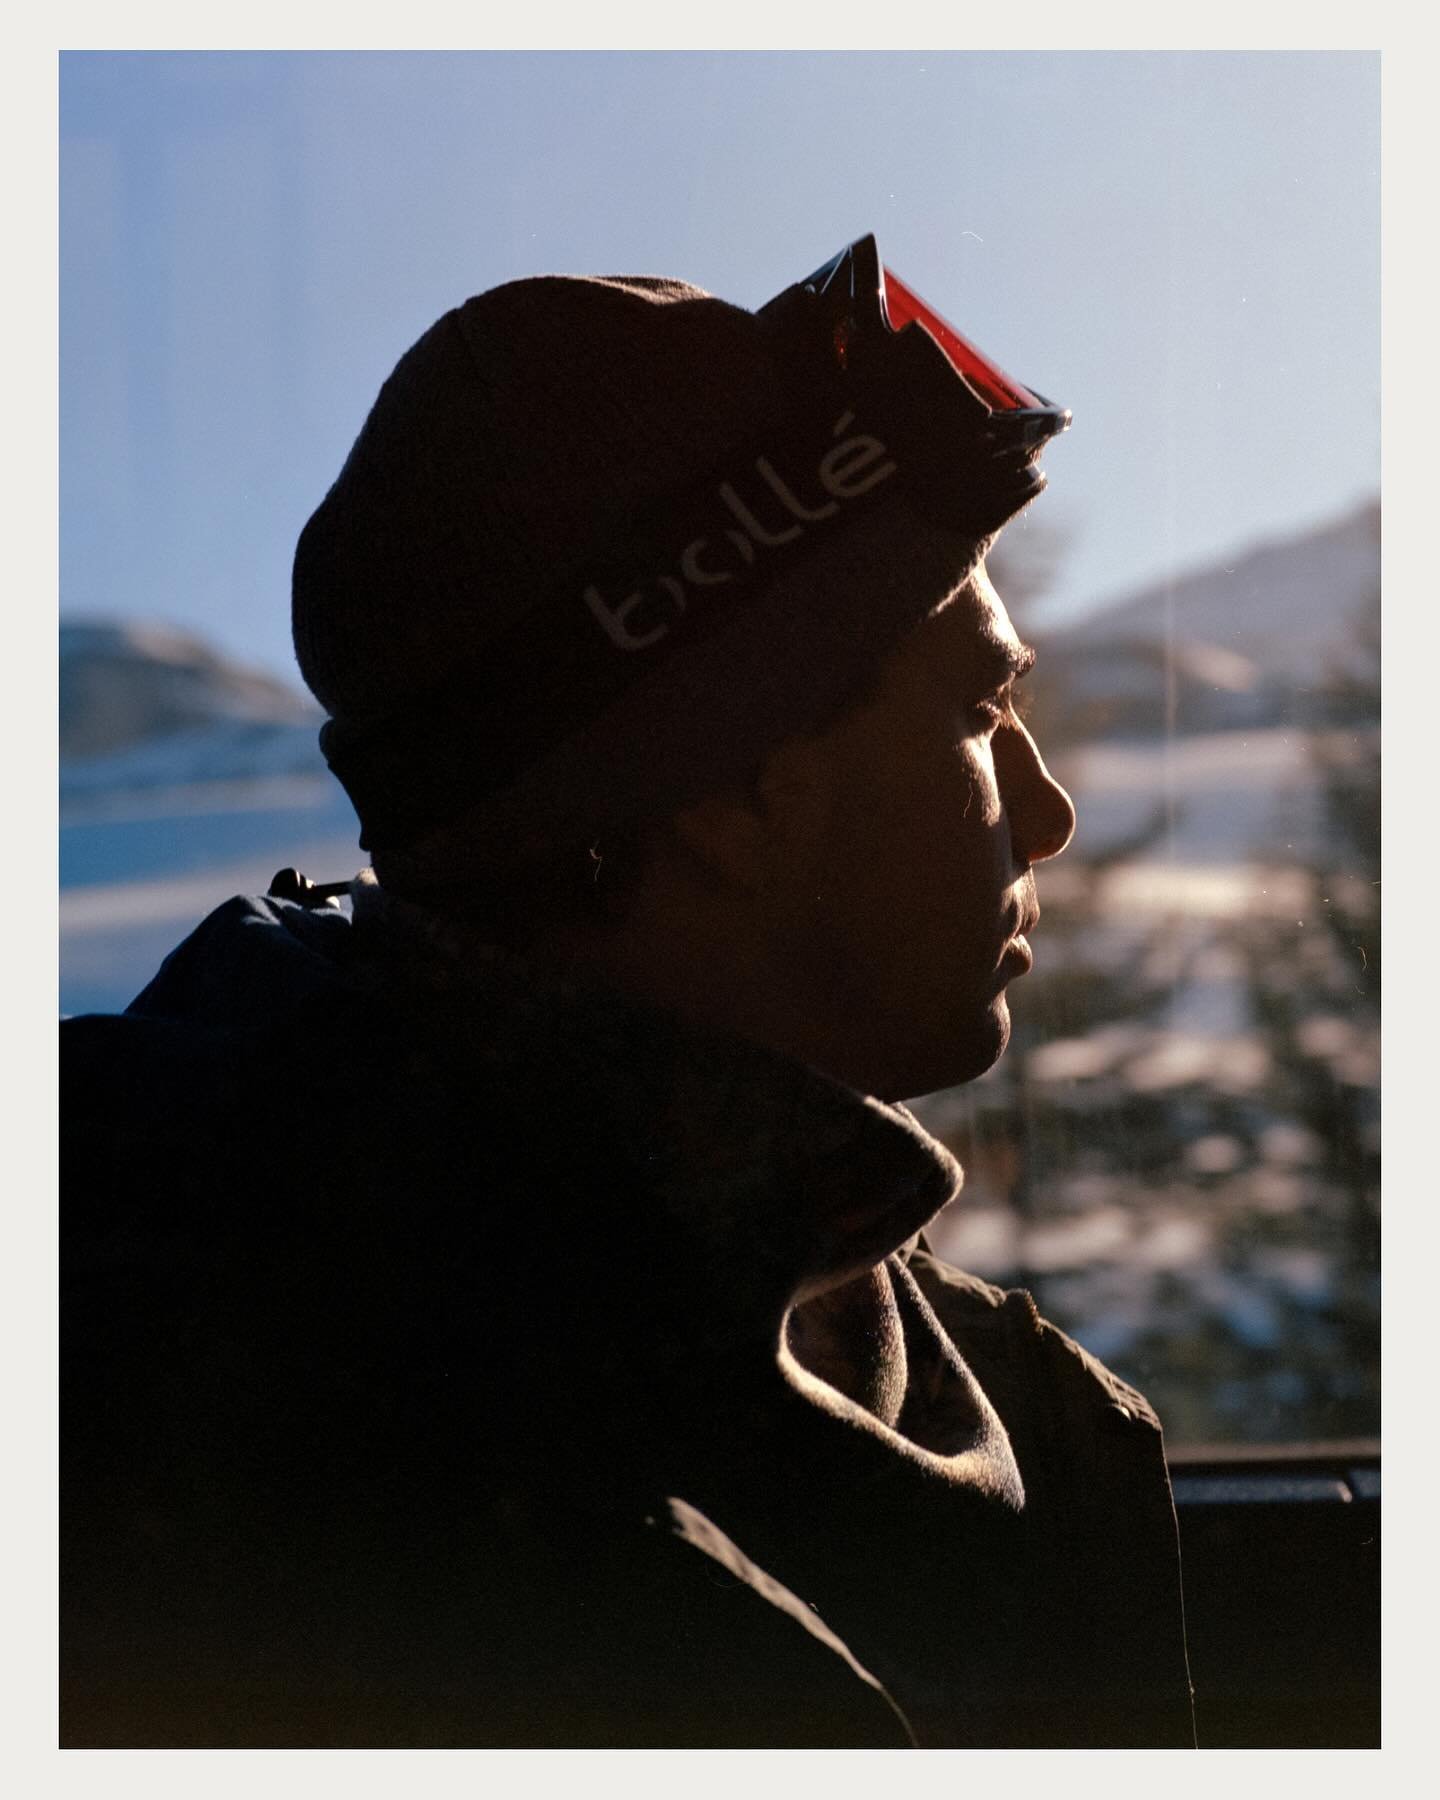 Early morning light + Dan on the way to Leadville, Colorado